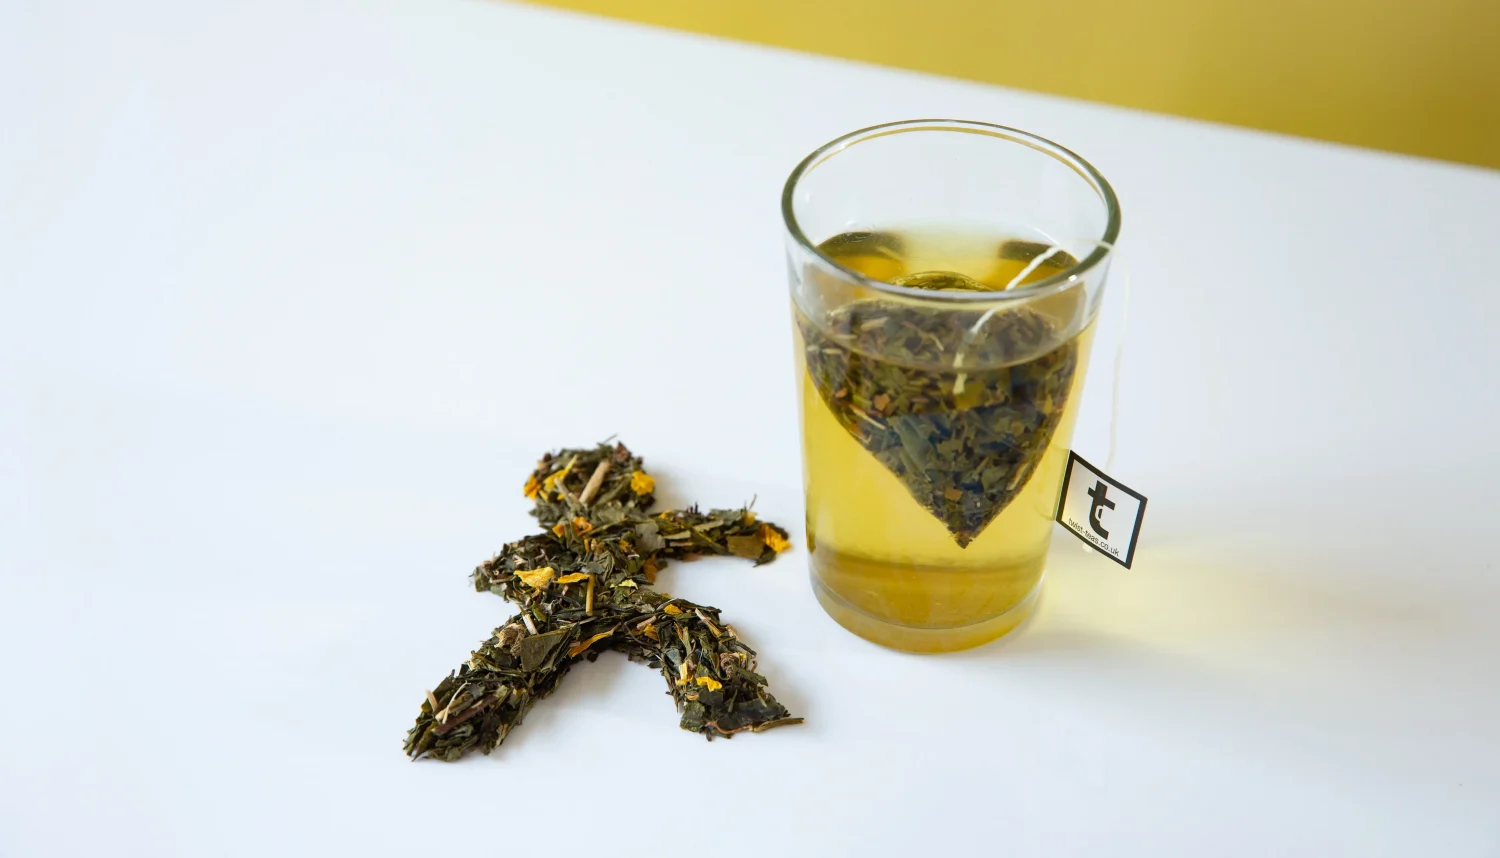 An image of a Green Teabag steeping in a glass. There are some Green Tea leaves personally arranged in the shape of a man next to the glass. 